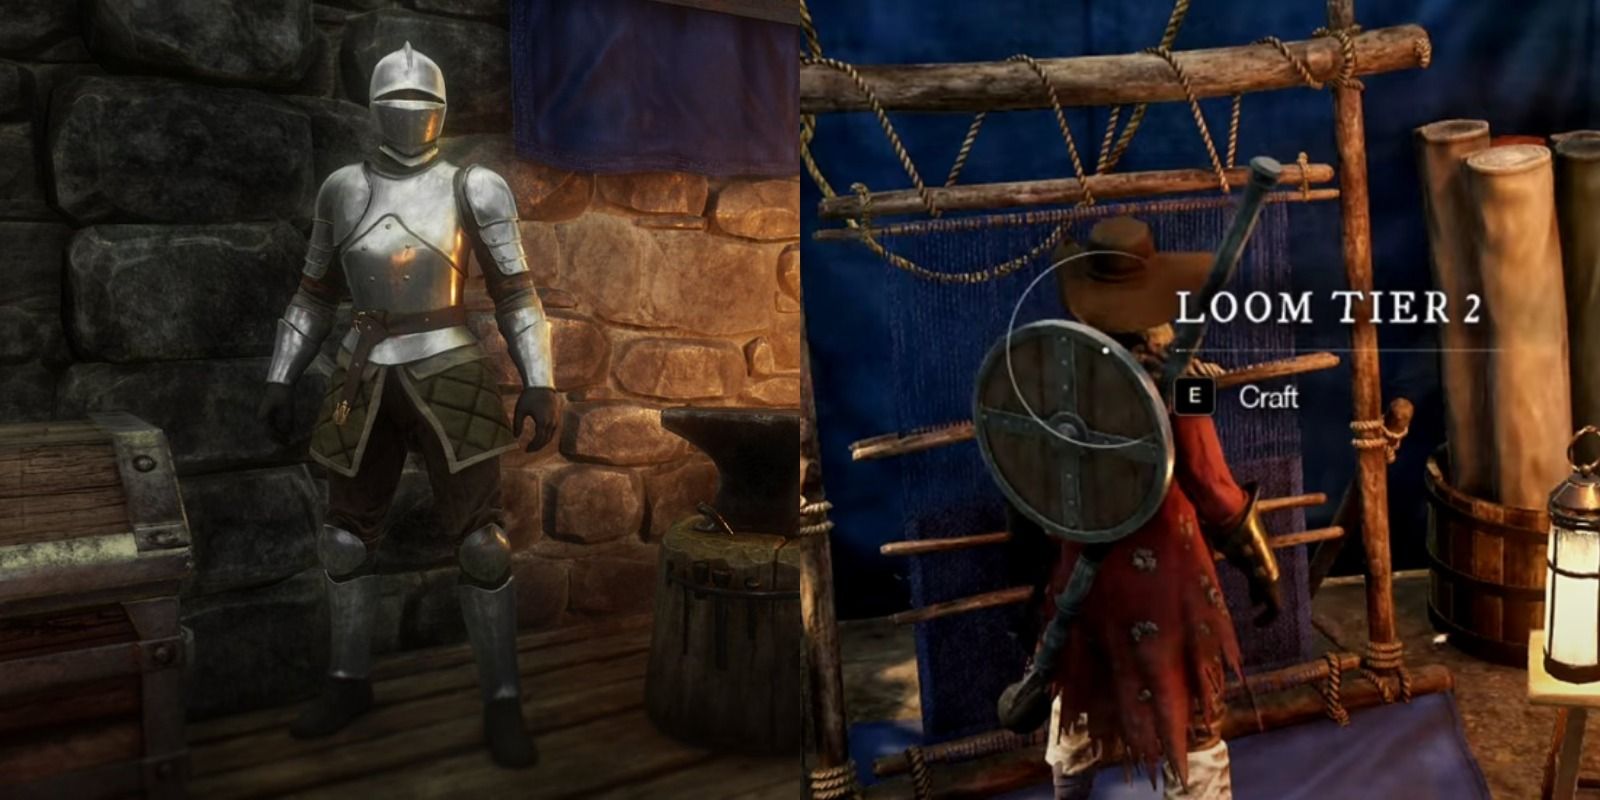 steel armor set and player looking at a tier 2 loom.